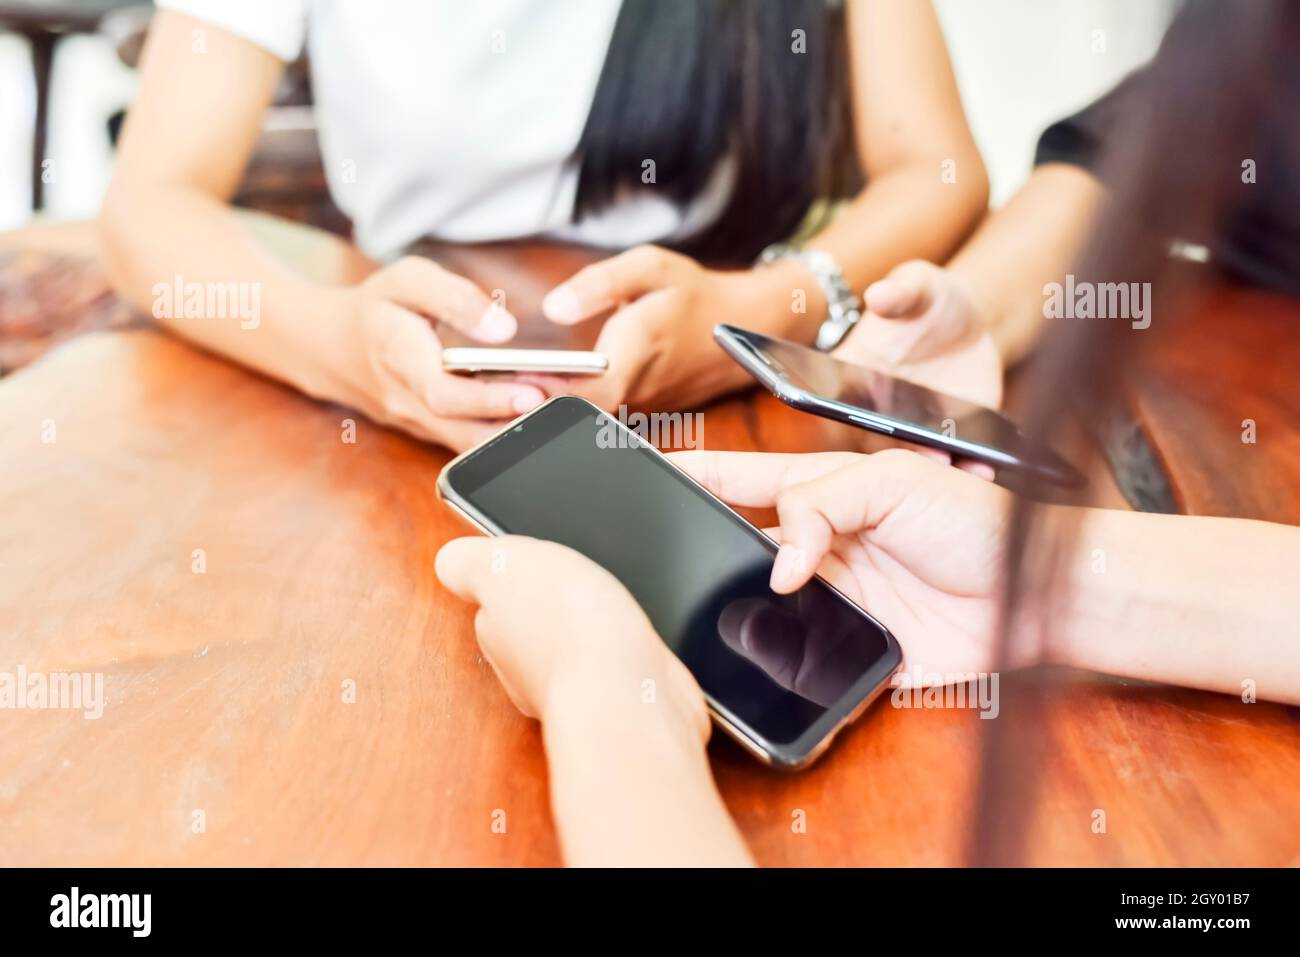 Unidentified three young people using  smartphone together. In selective focus.Close-up. Technology gadget and phone addiction concept. Stock Photo